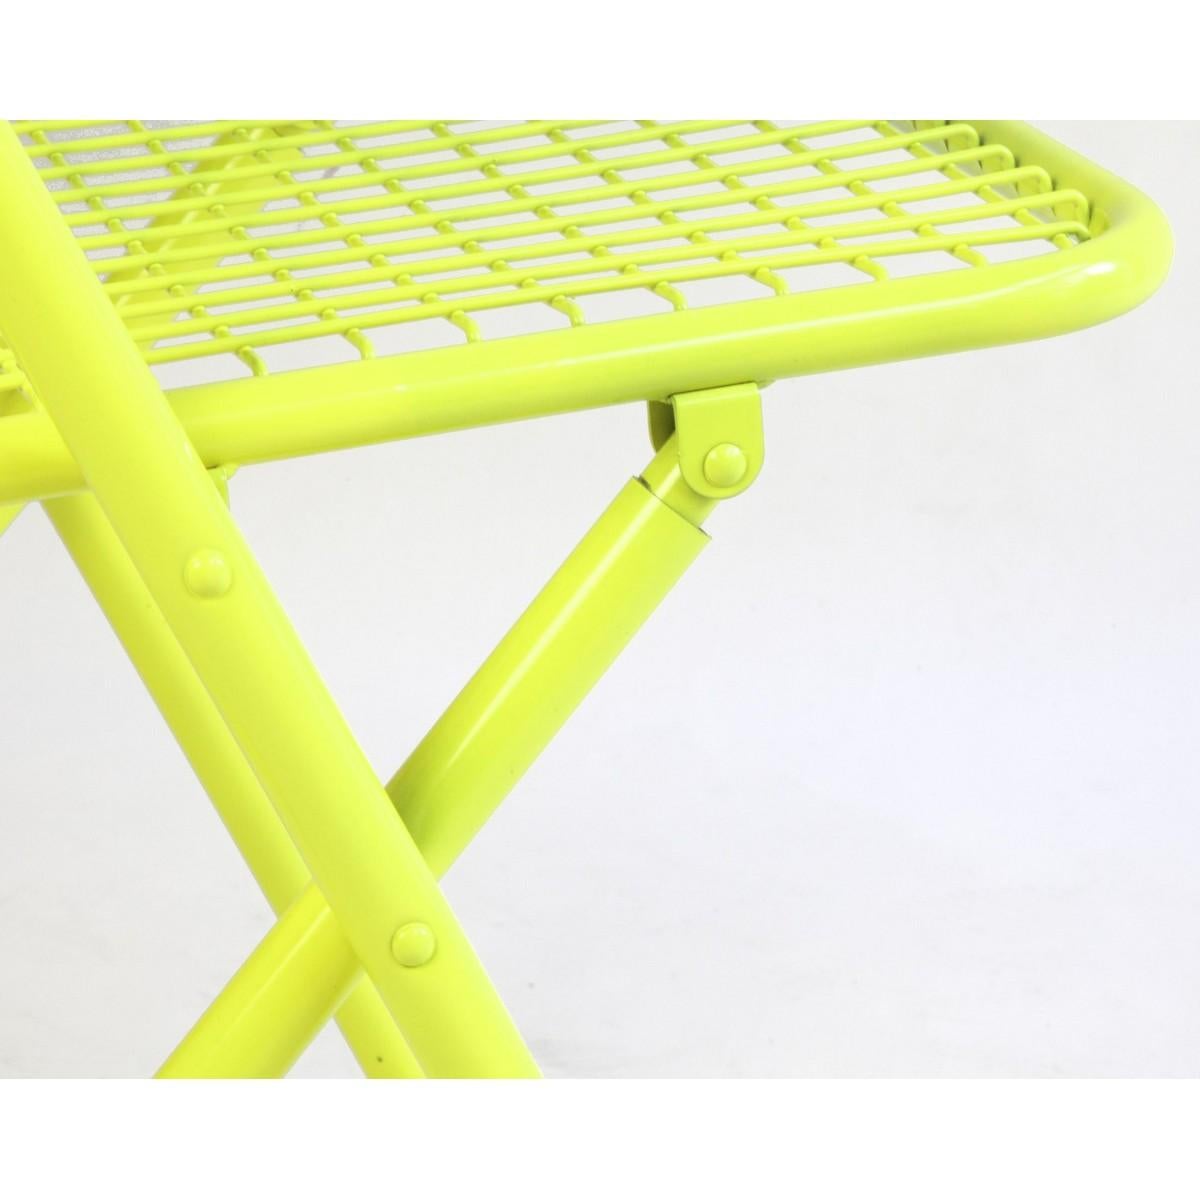 Spanish New Folding Iron Chair Yellow 1026 by Houtique & Masquespacio Signed